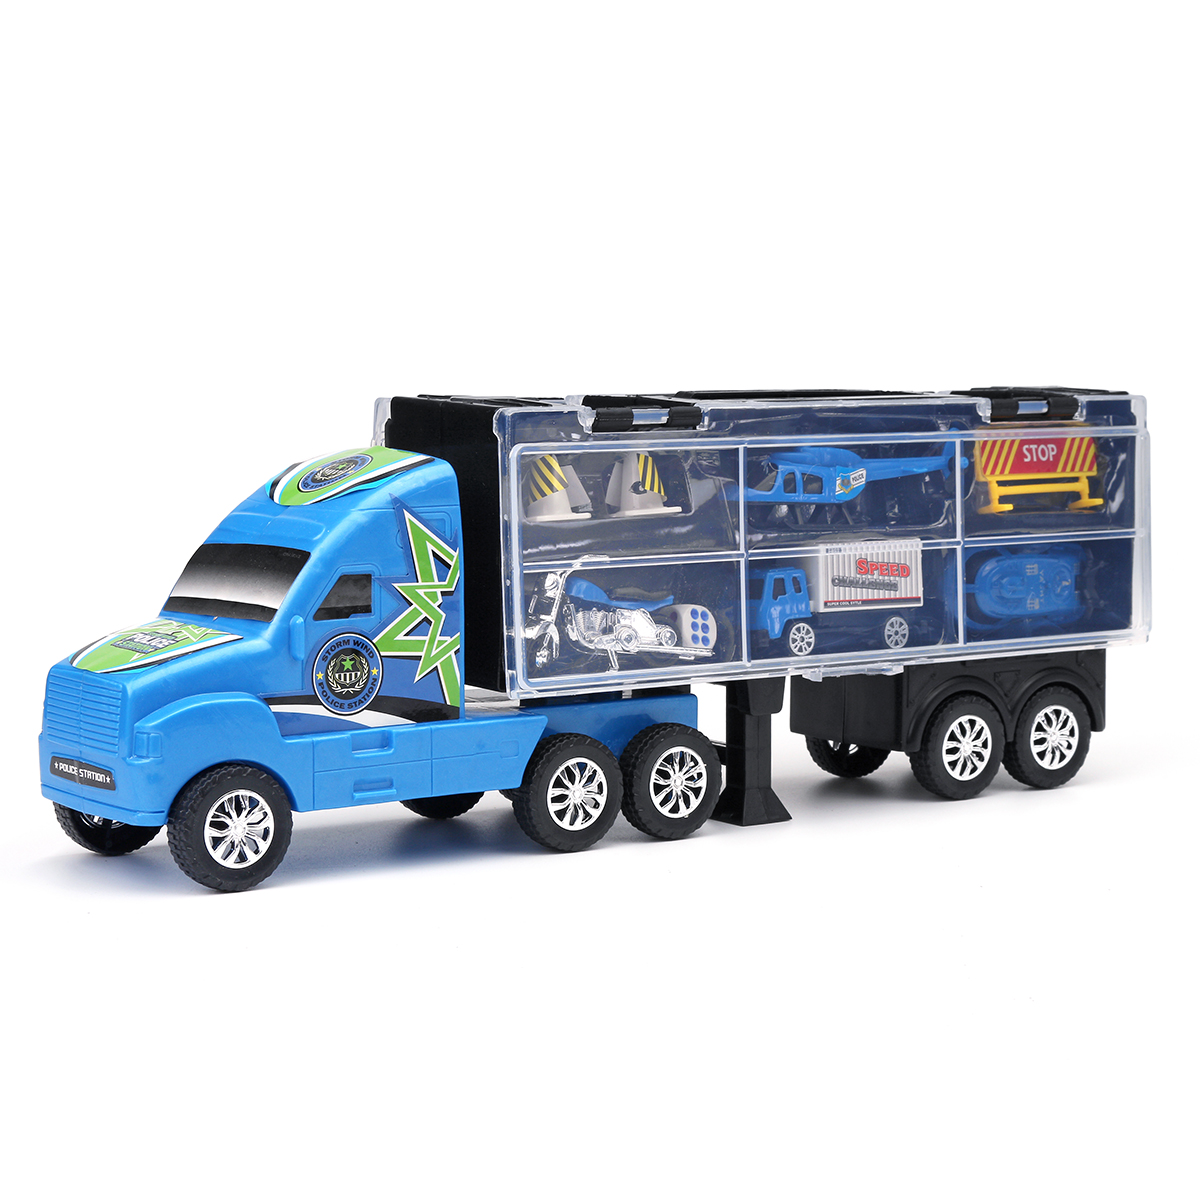 Alloy-Trailer-Container-Car-Storage-Box-Diecast-Car-Model-Set-Toy-for-Childrens-Gift-1635959-9